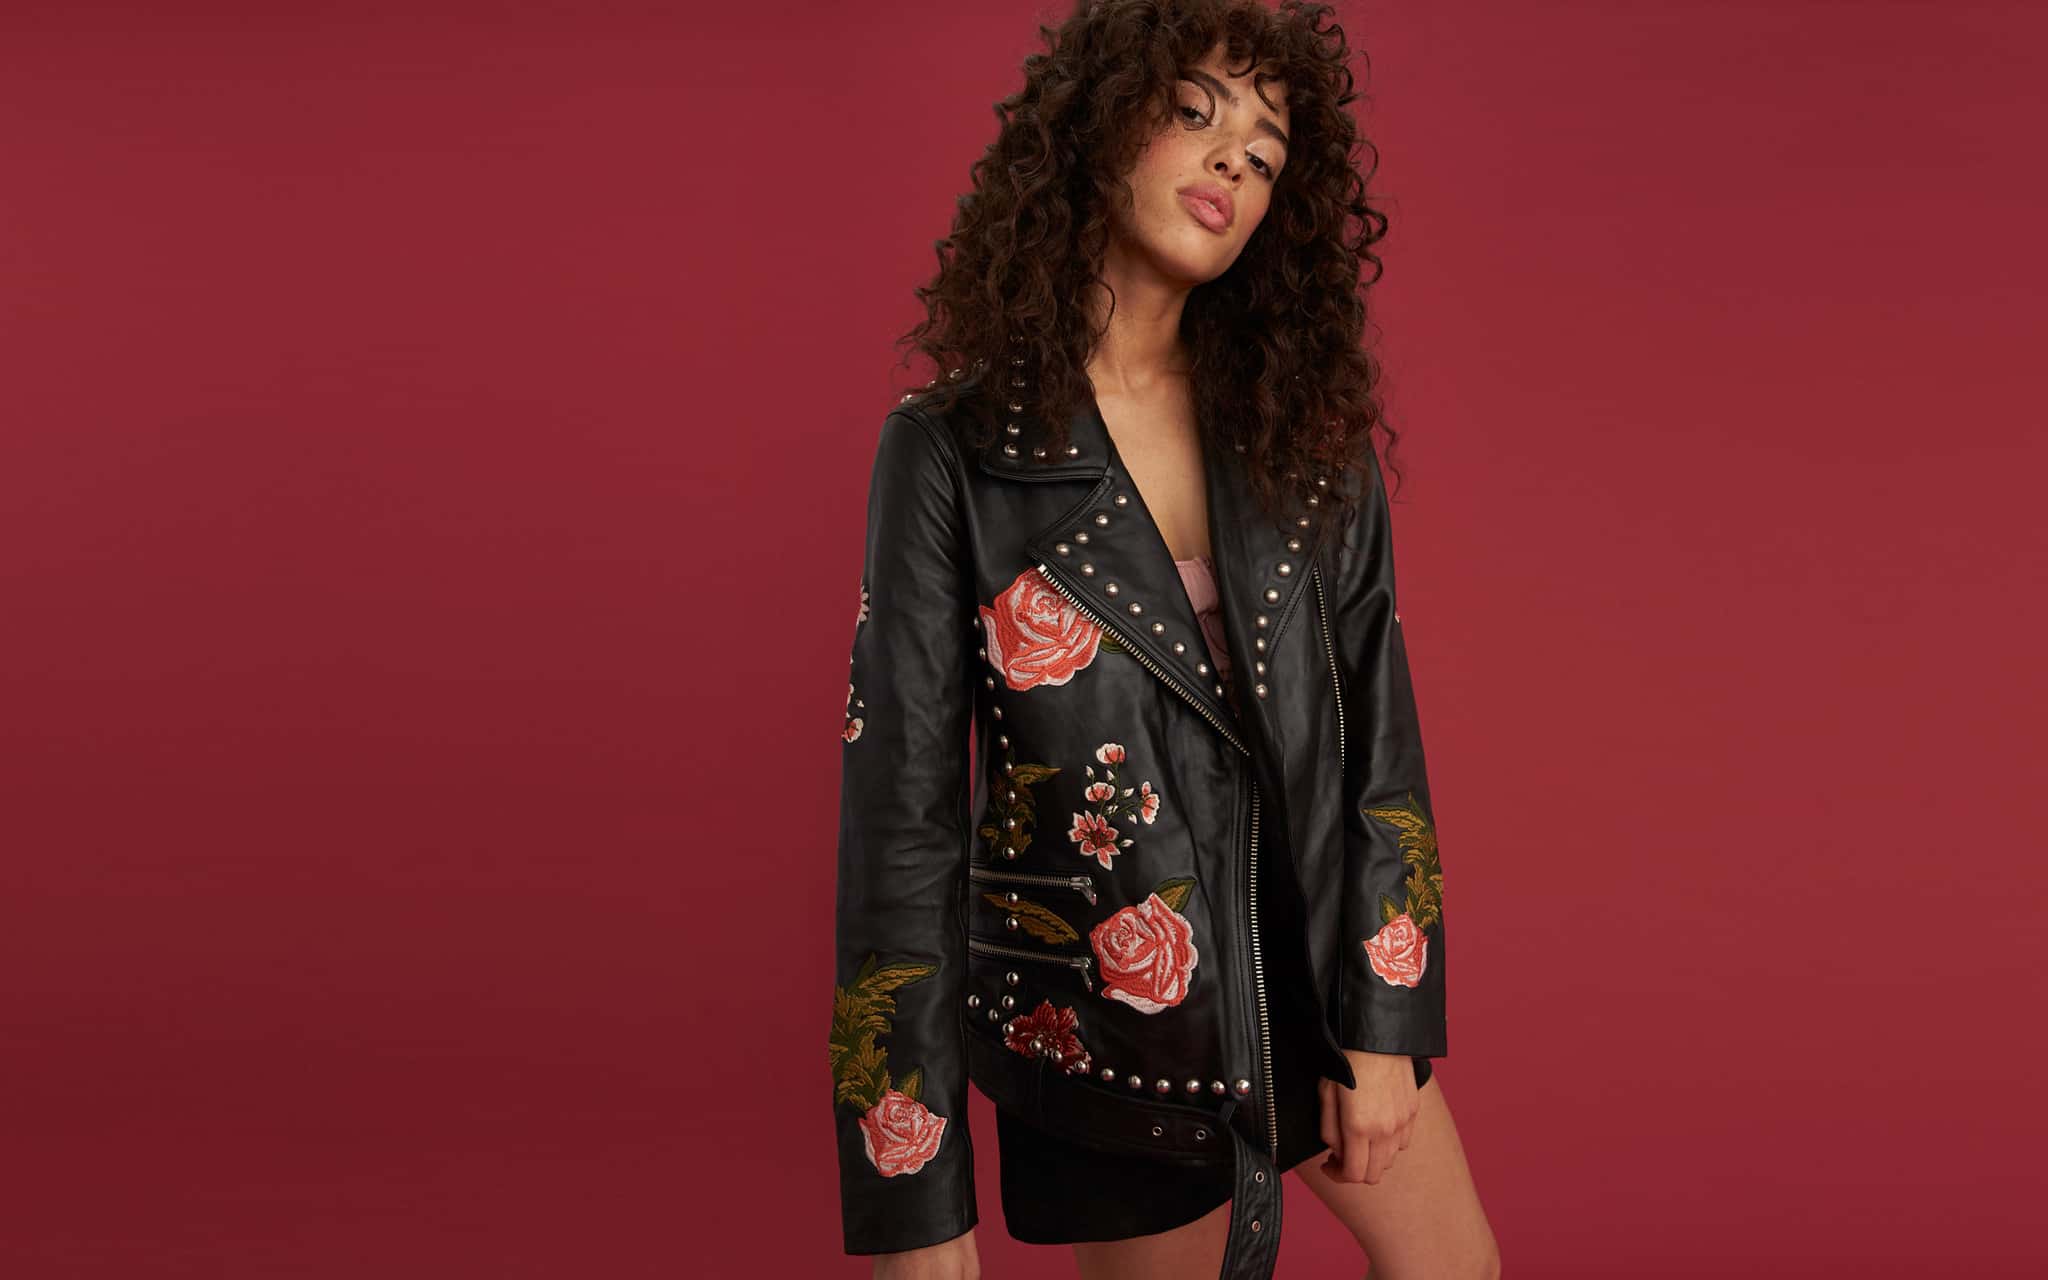 embroidered clothes trend - embroidered jacket